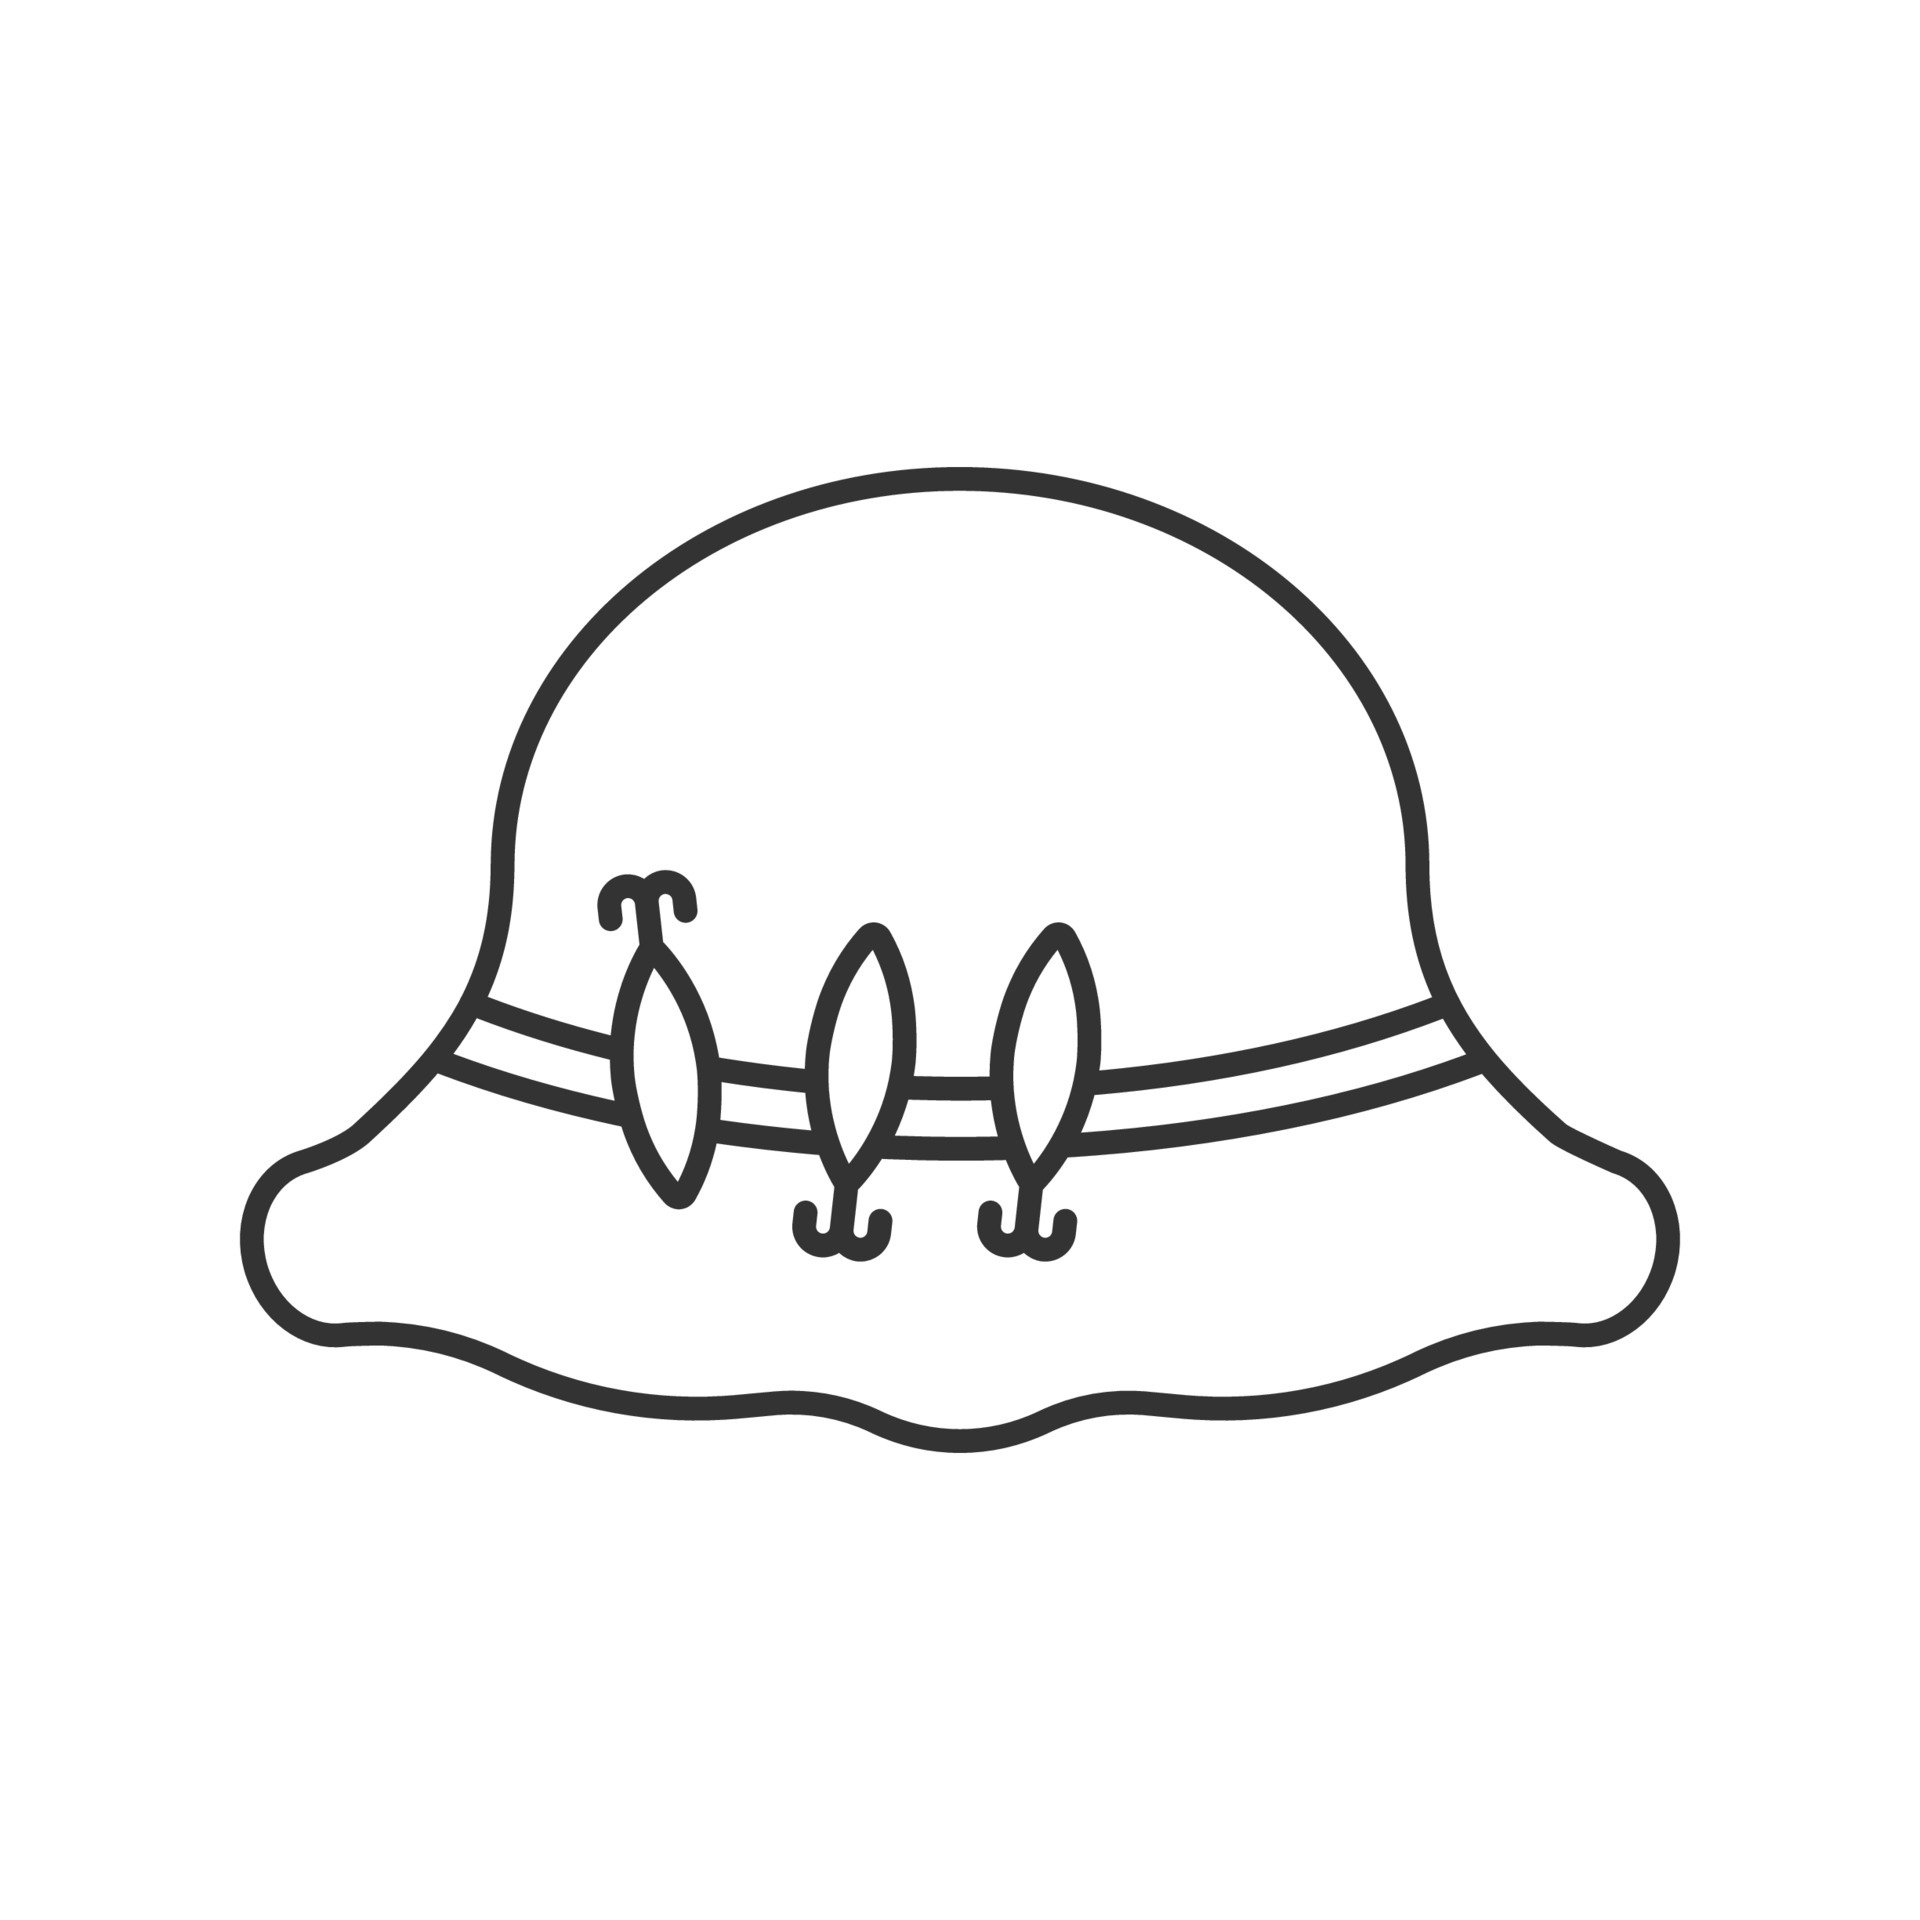 https://static.vecteezy.com/system/resources/previews/004/239/762/original/fisherman-s-hat-with-hooks-linear-icon-fishing-equipment-thin-line-illustration-contour-symbol-isolated-outline-drawing-vector.jpg